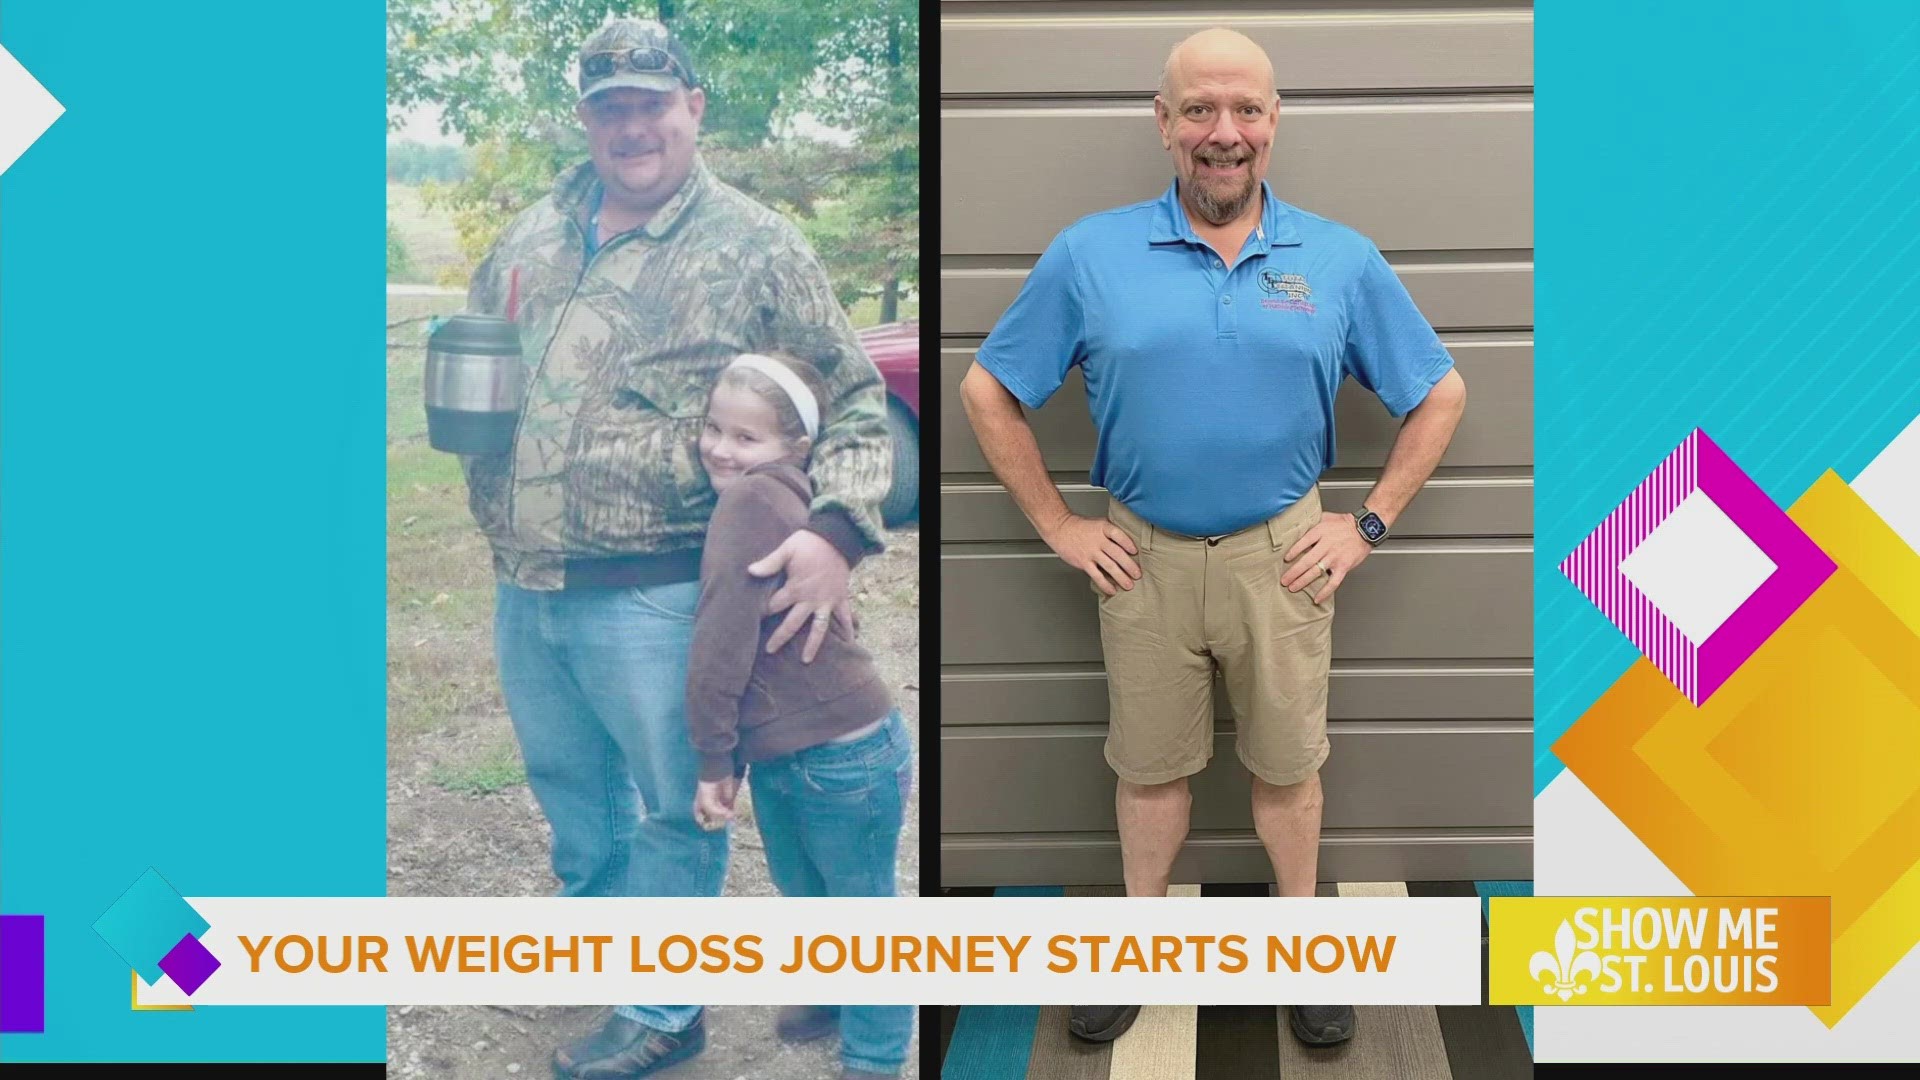 Brian is now 140 pounds lighter after working with St. Louis's go-to weight loss coach Charles D'Angelo and now you can too.